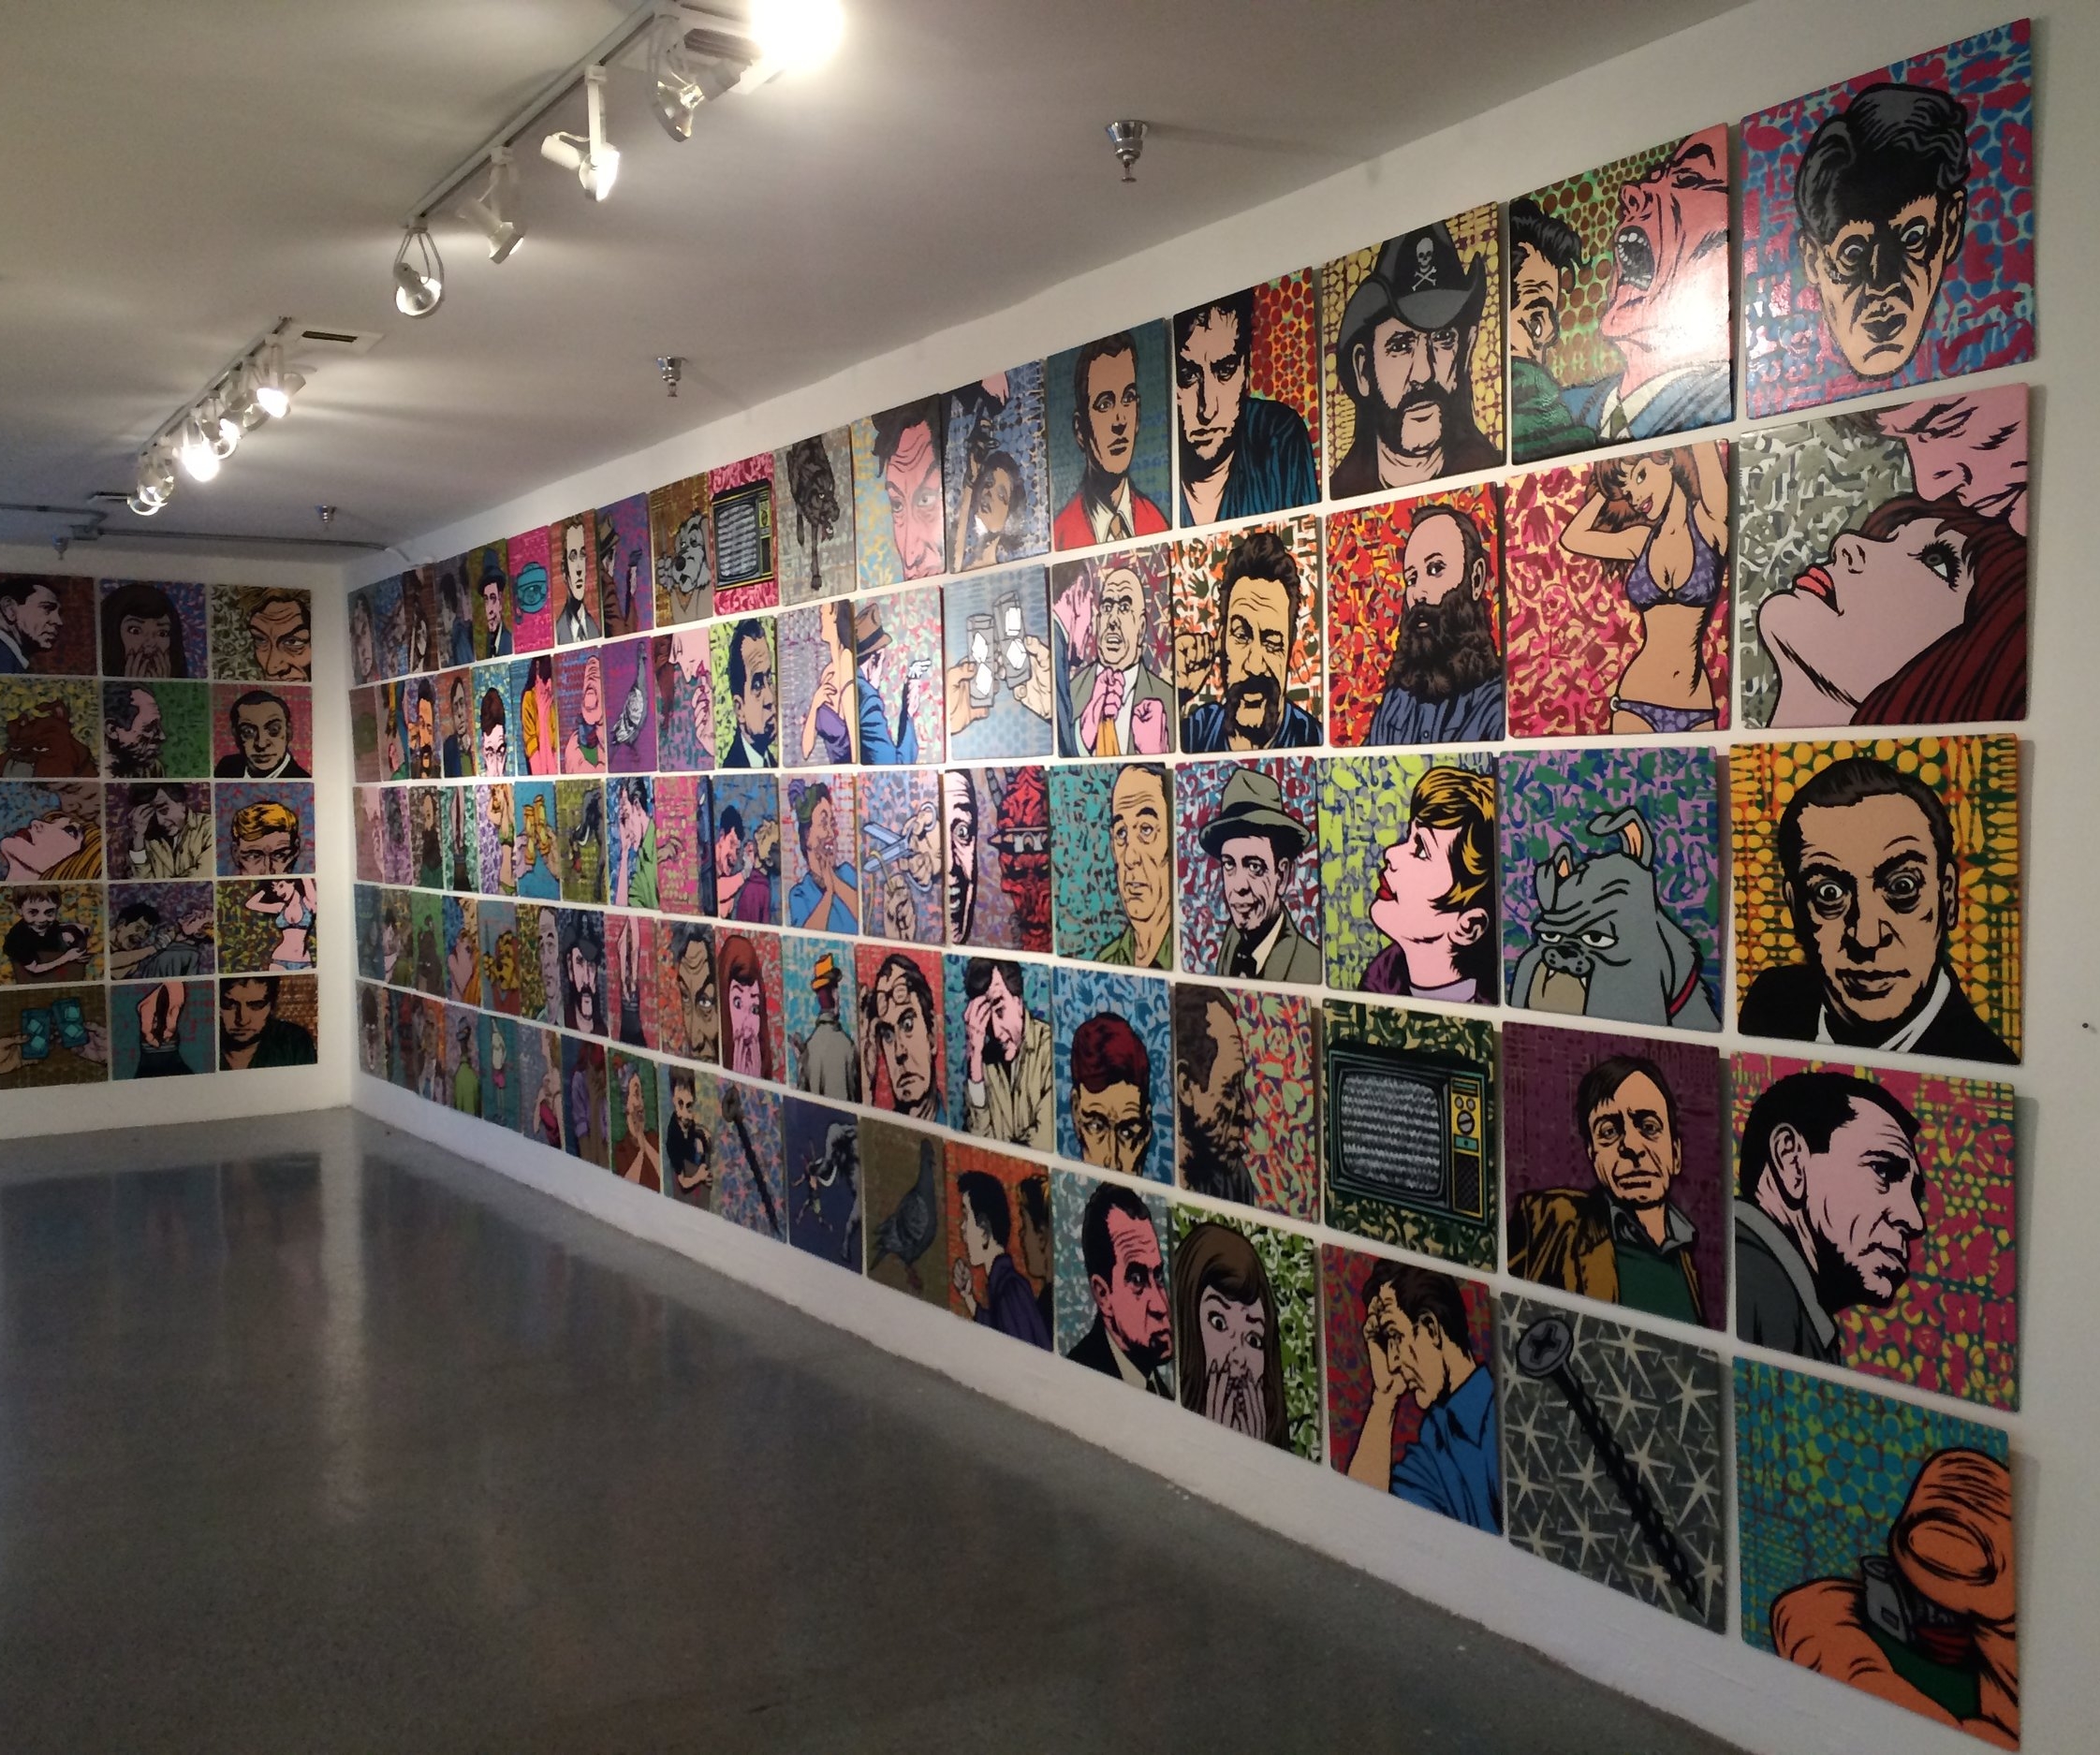 Stencil paintings/installation for "Mostly friends, sorta" show. Los Angeles, 2015